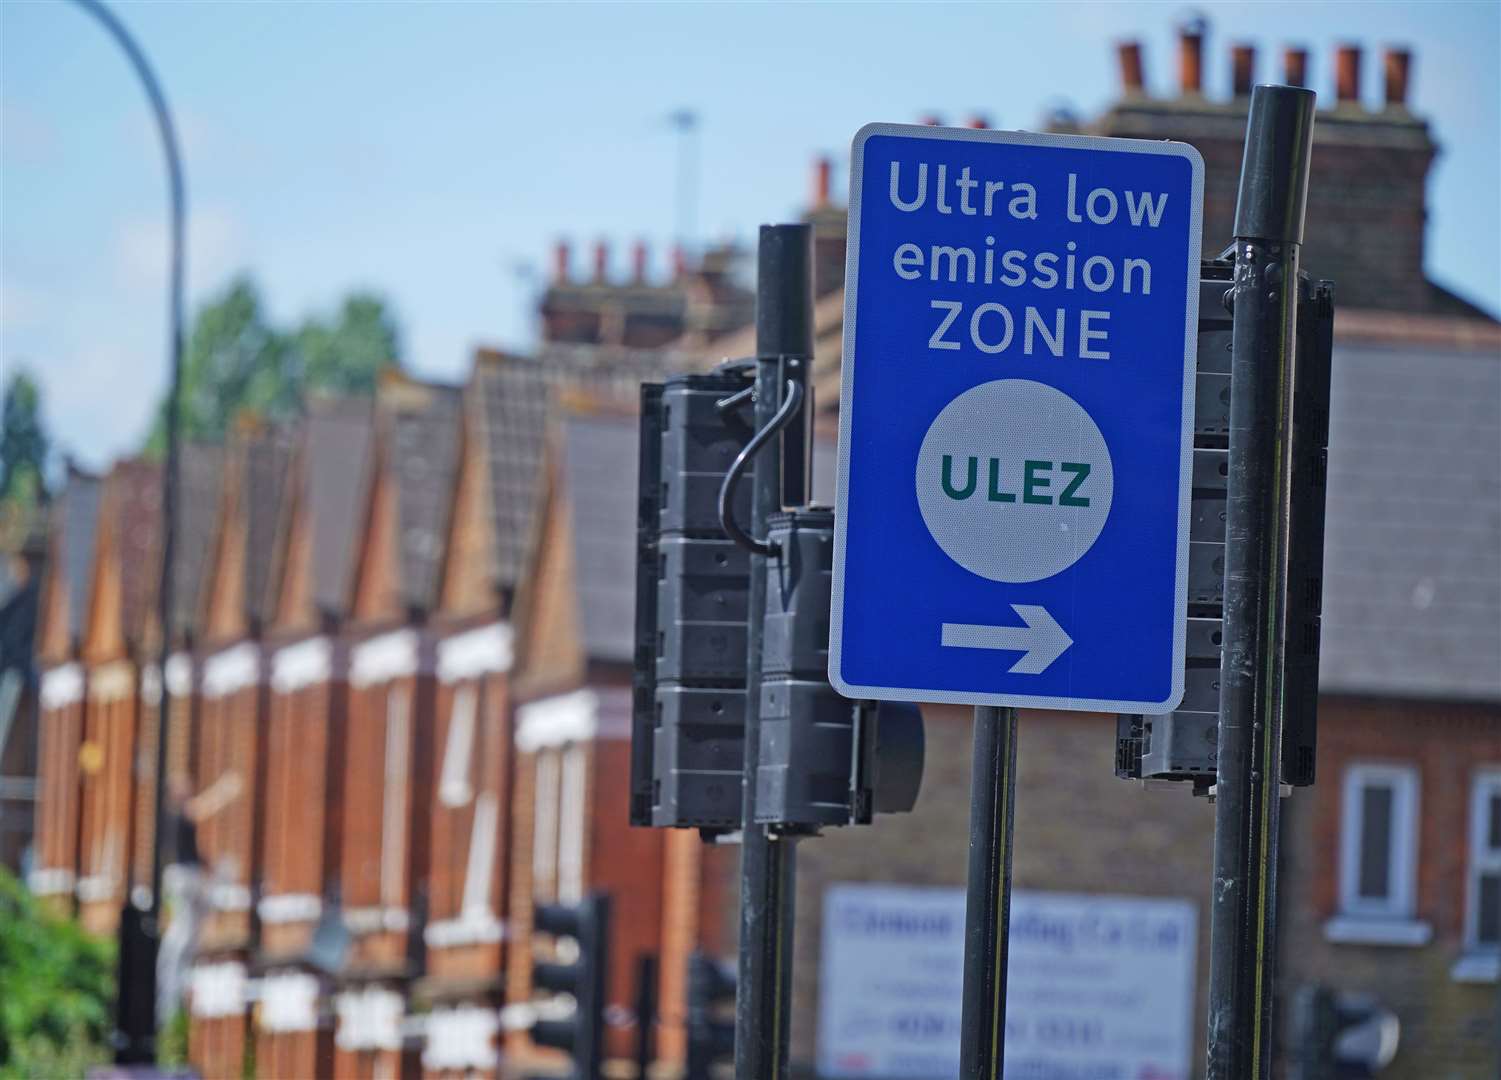 The AA has said that lack of signage leading up to the zone could lead to drivers entering the zone by mistake (Yui Mok/PA)